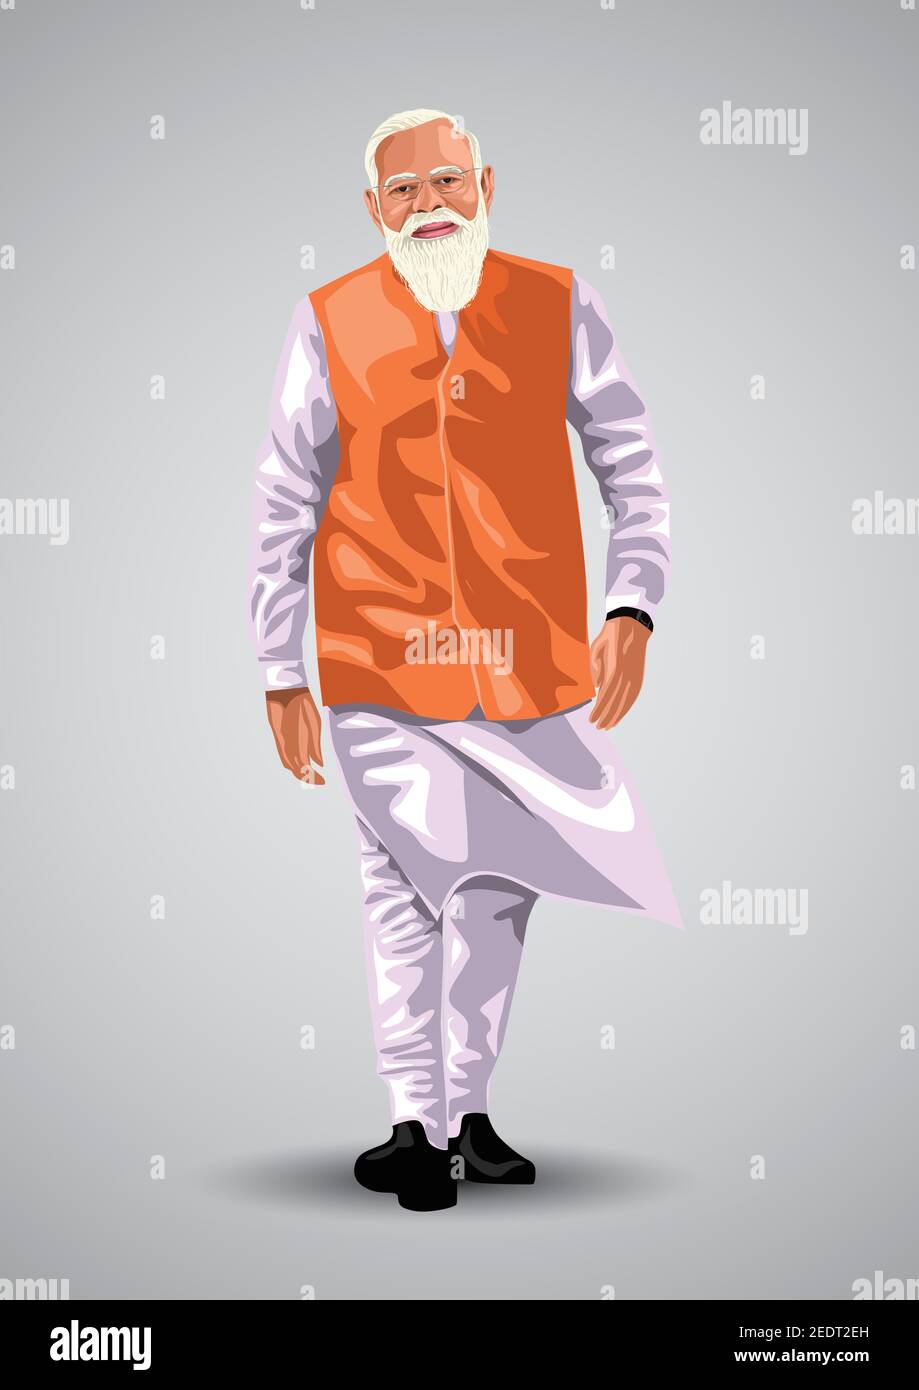 Indian prime minister Stock Vector Images - Alamy